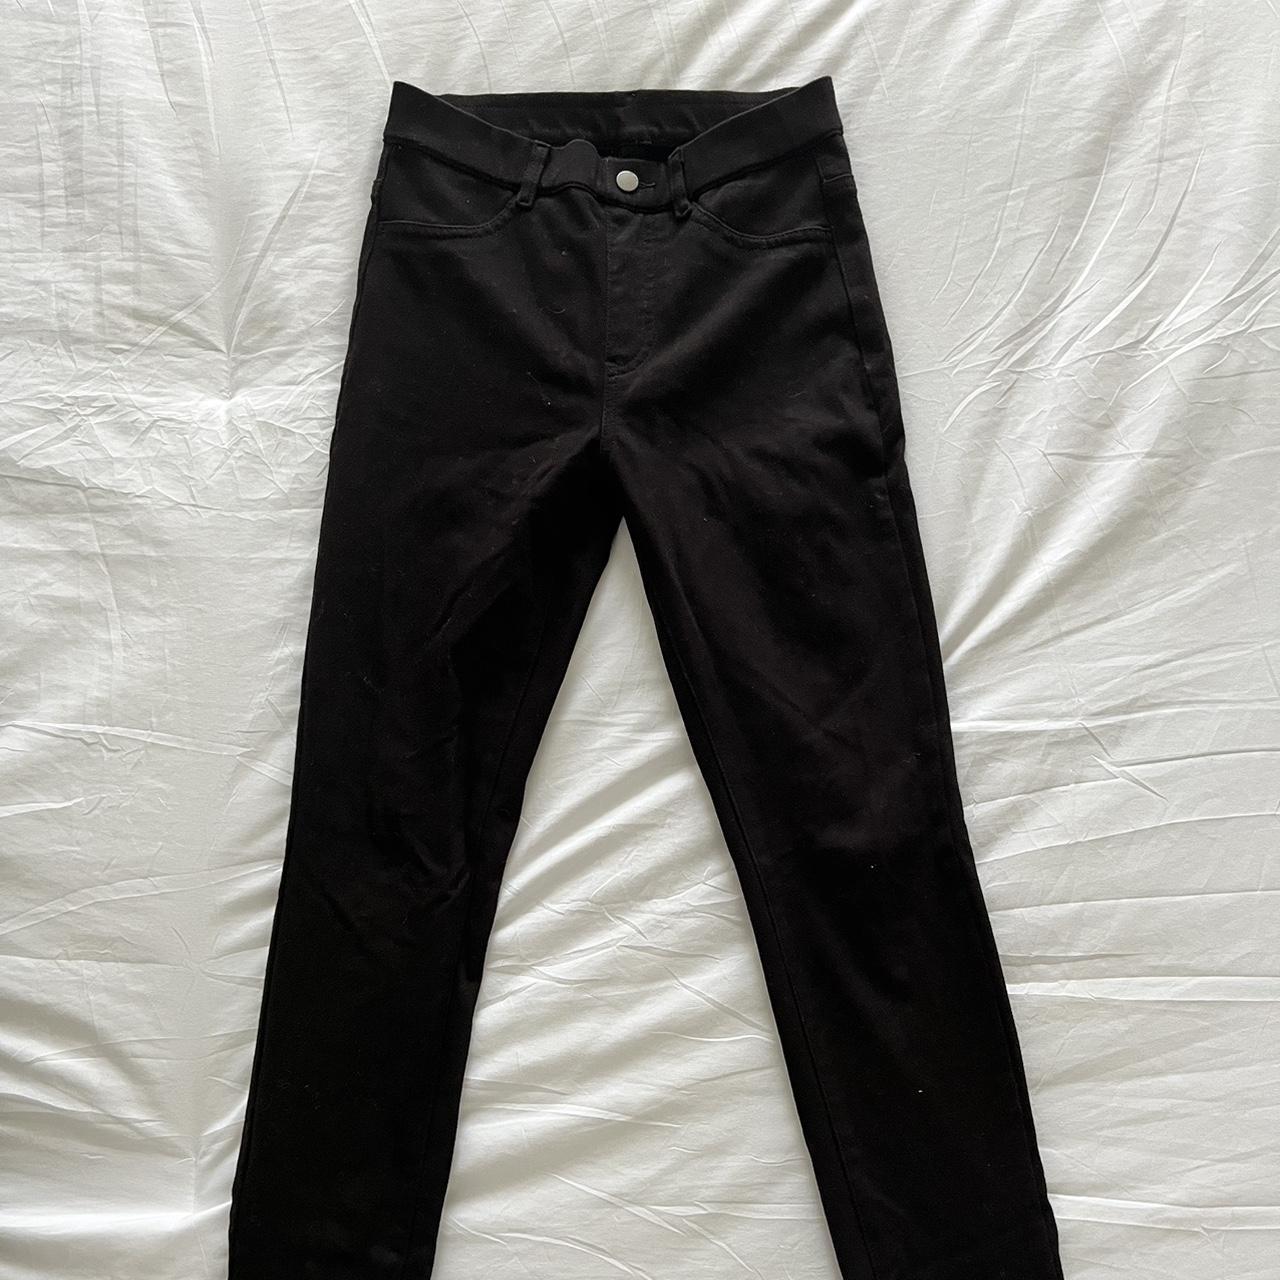 Help with sizing with this jogger pants : r/uniqlo